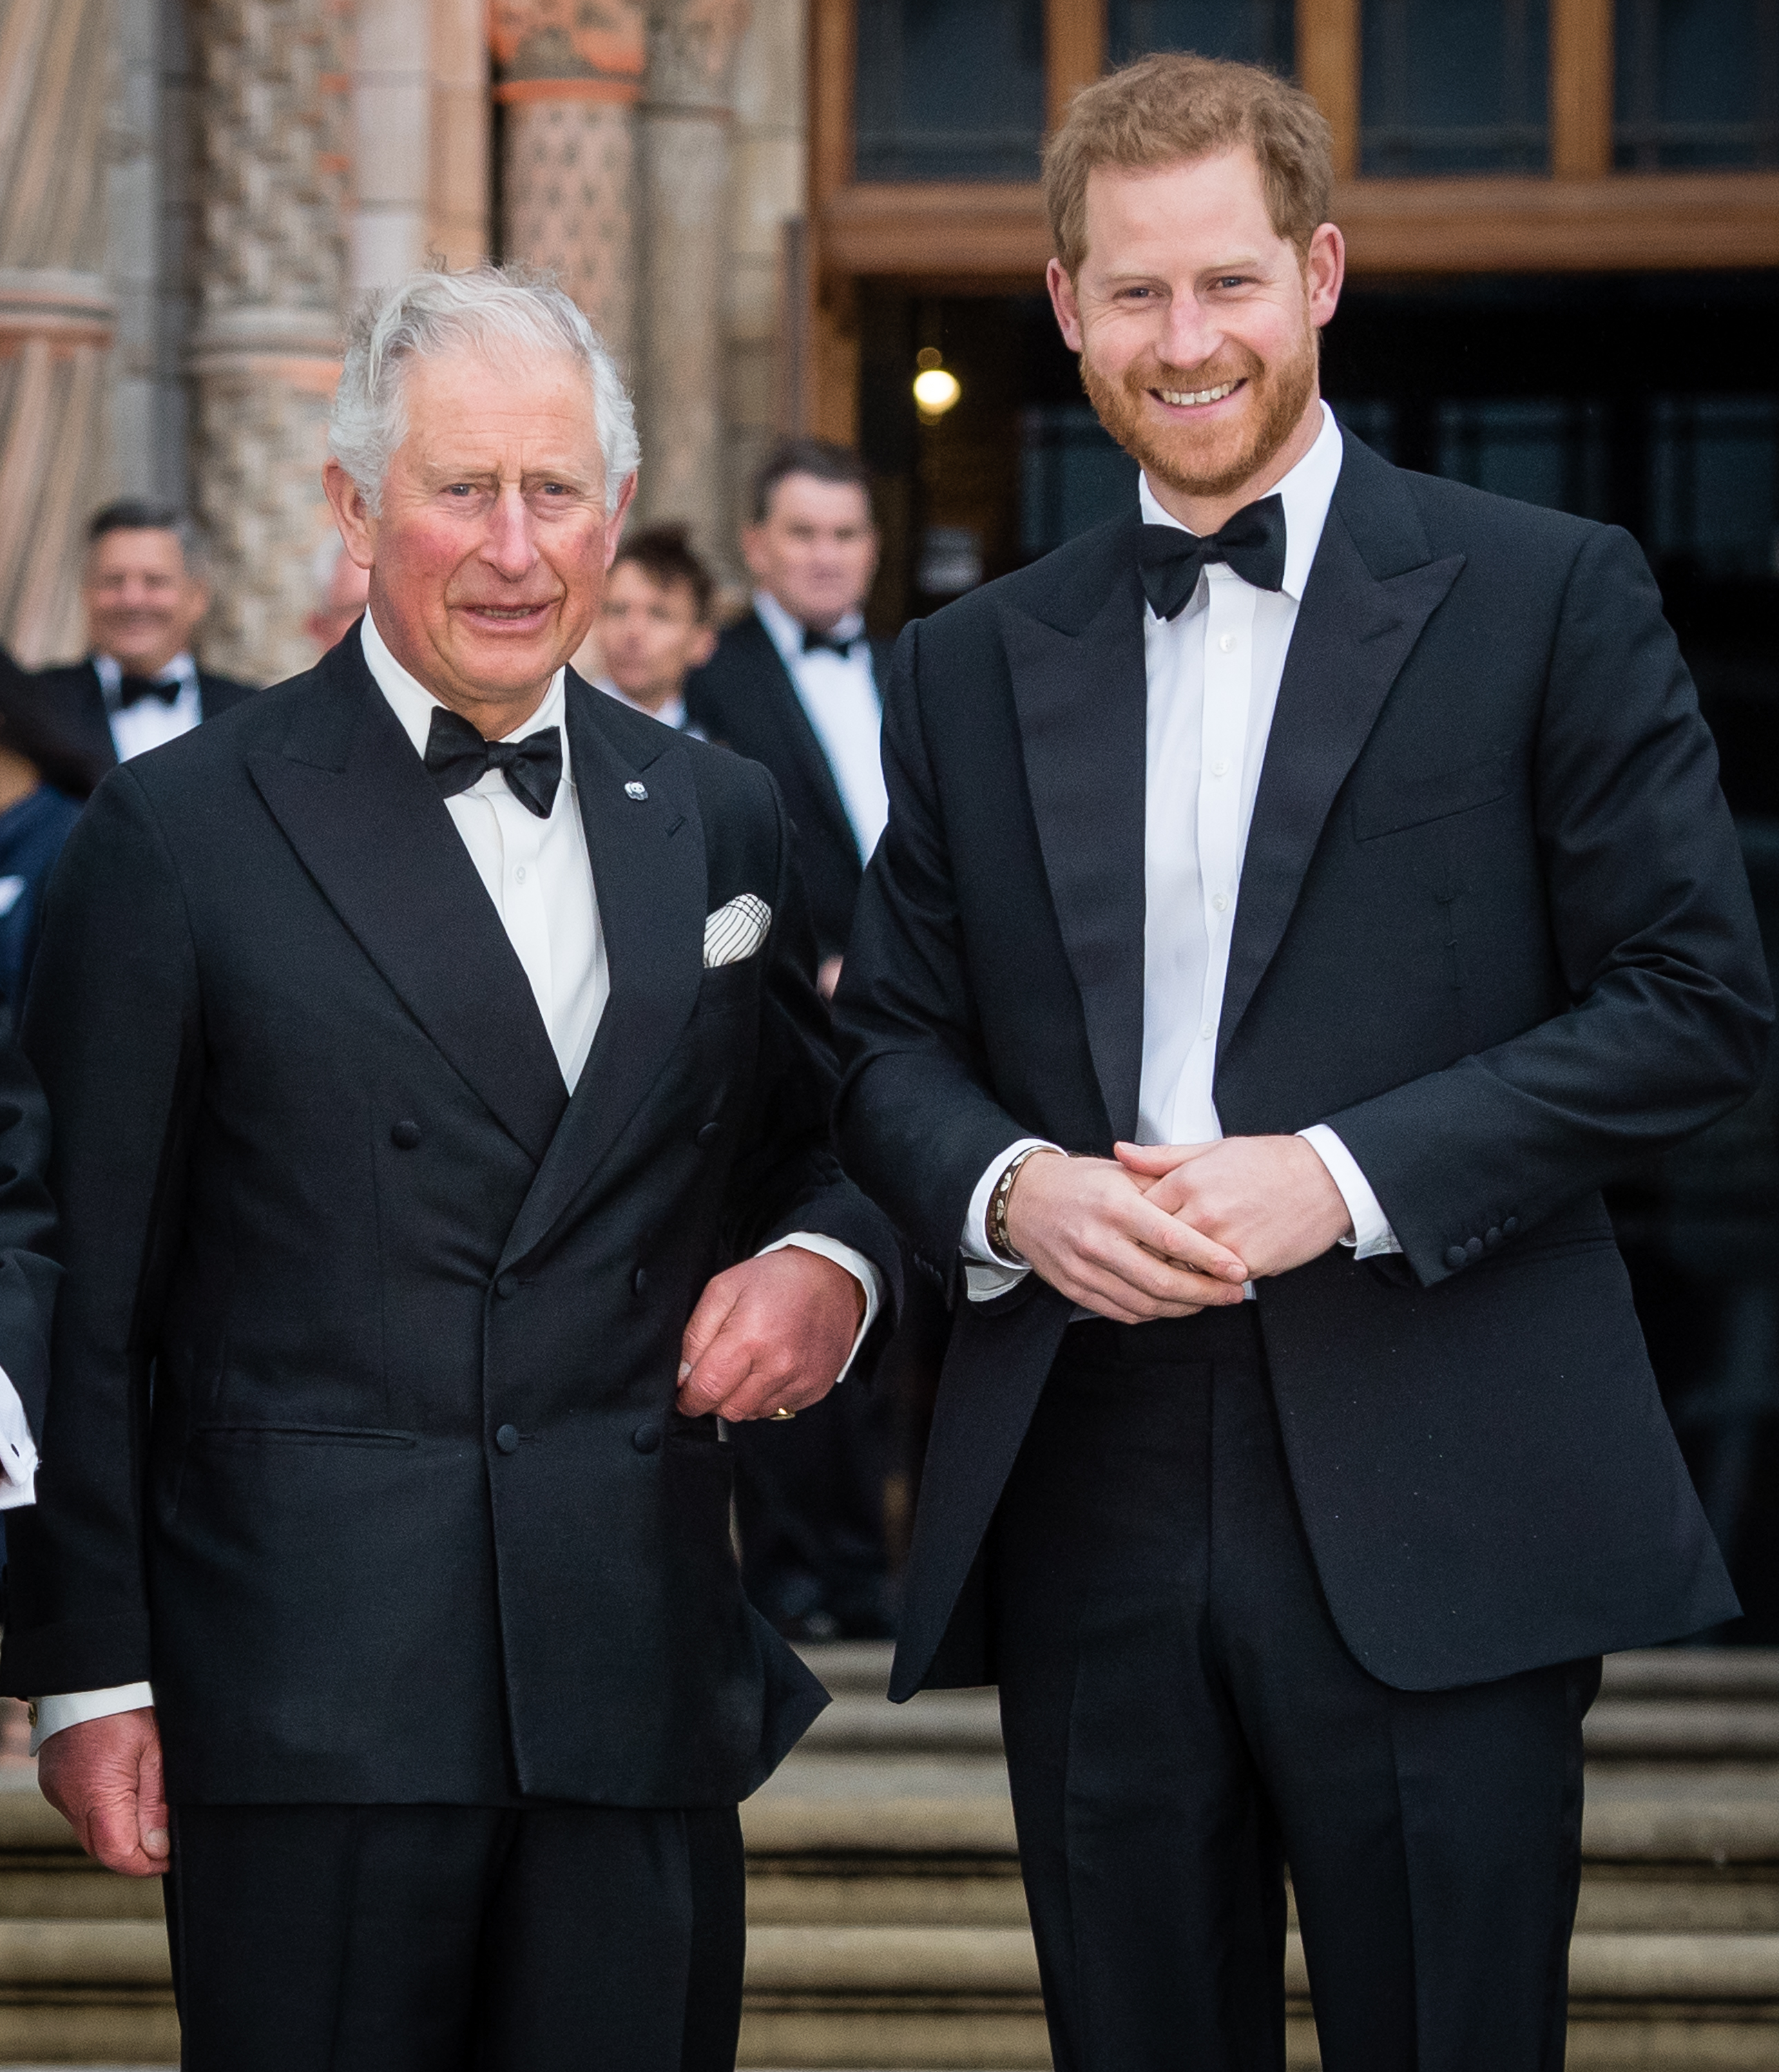 King Charles III and Prince Harry, Duke of Sussex attend the "Our Planet" global premiere on April 4, 2019 | Source: Getty Images